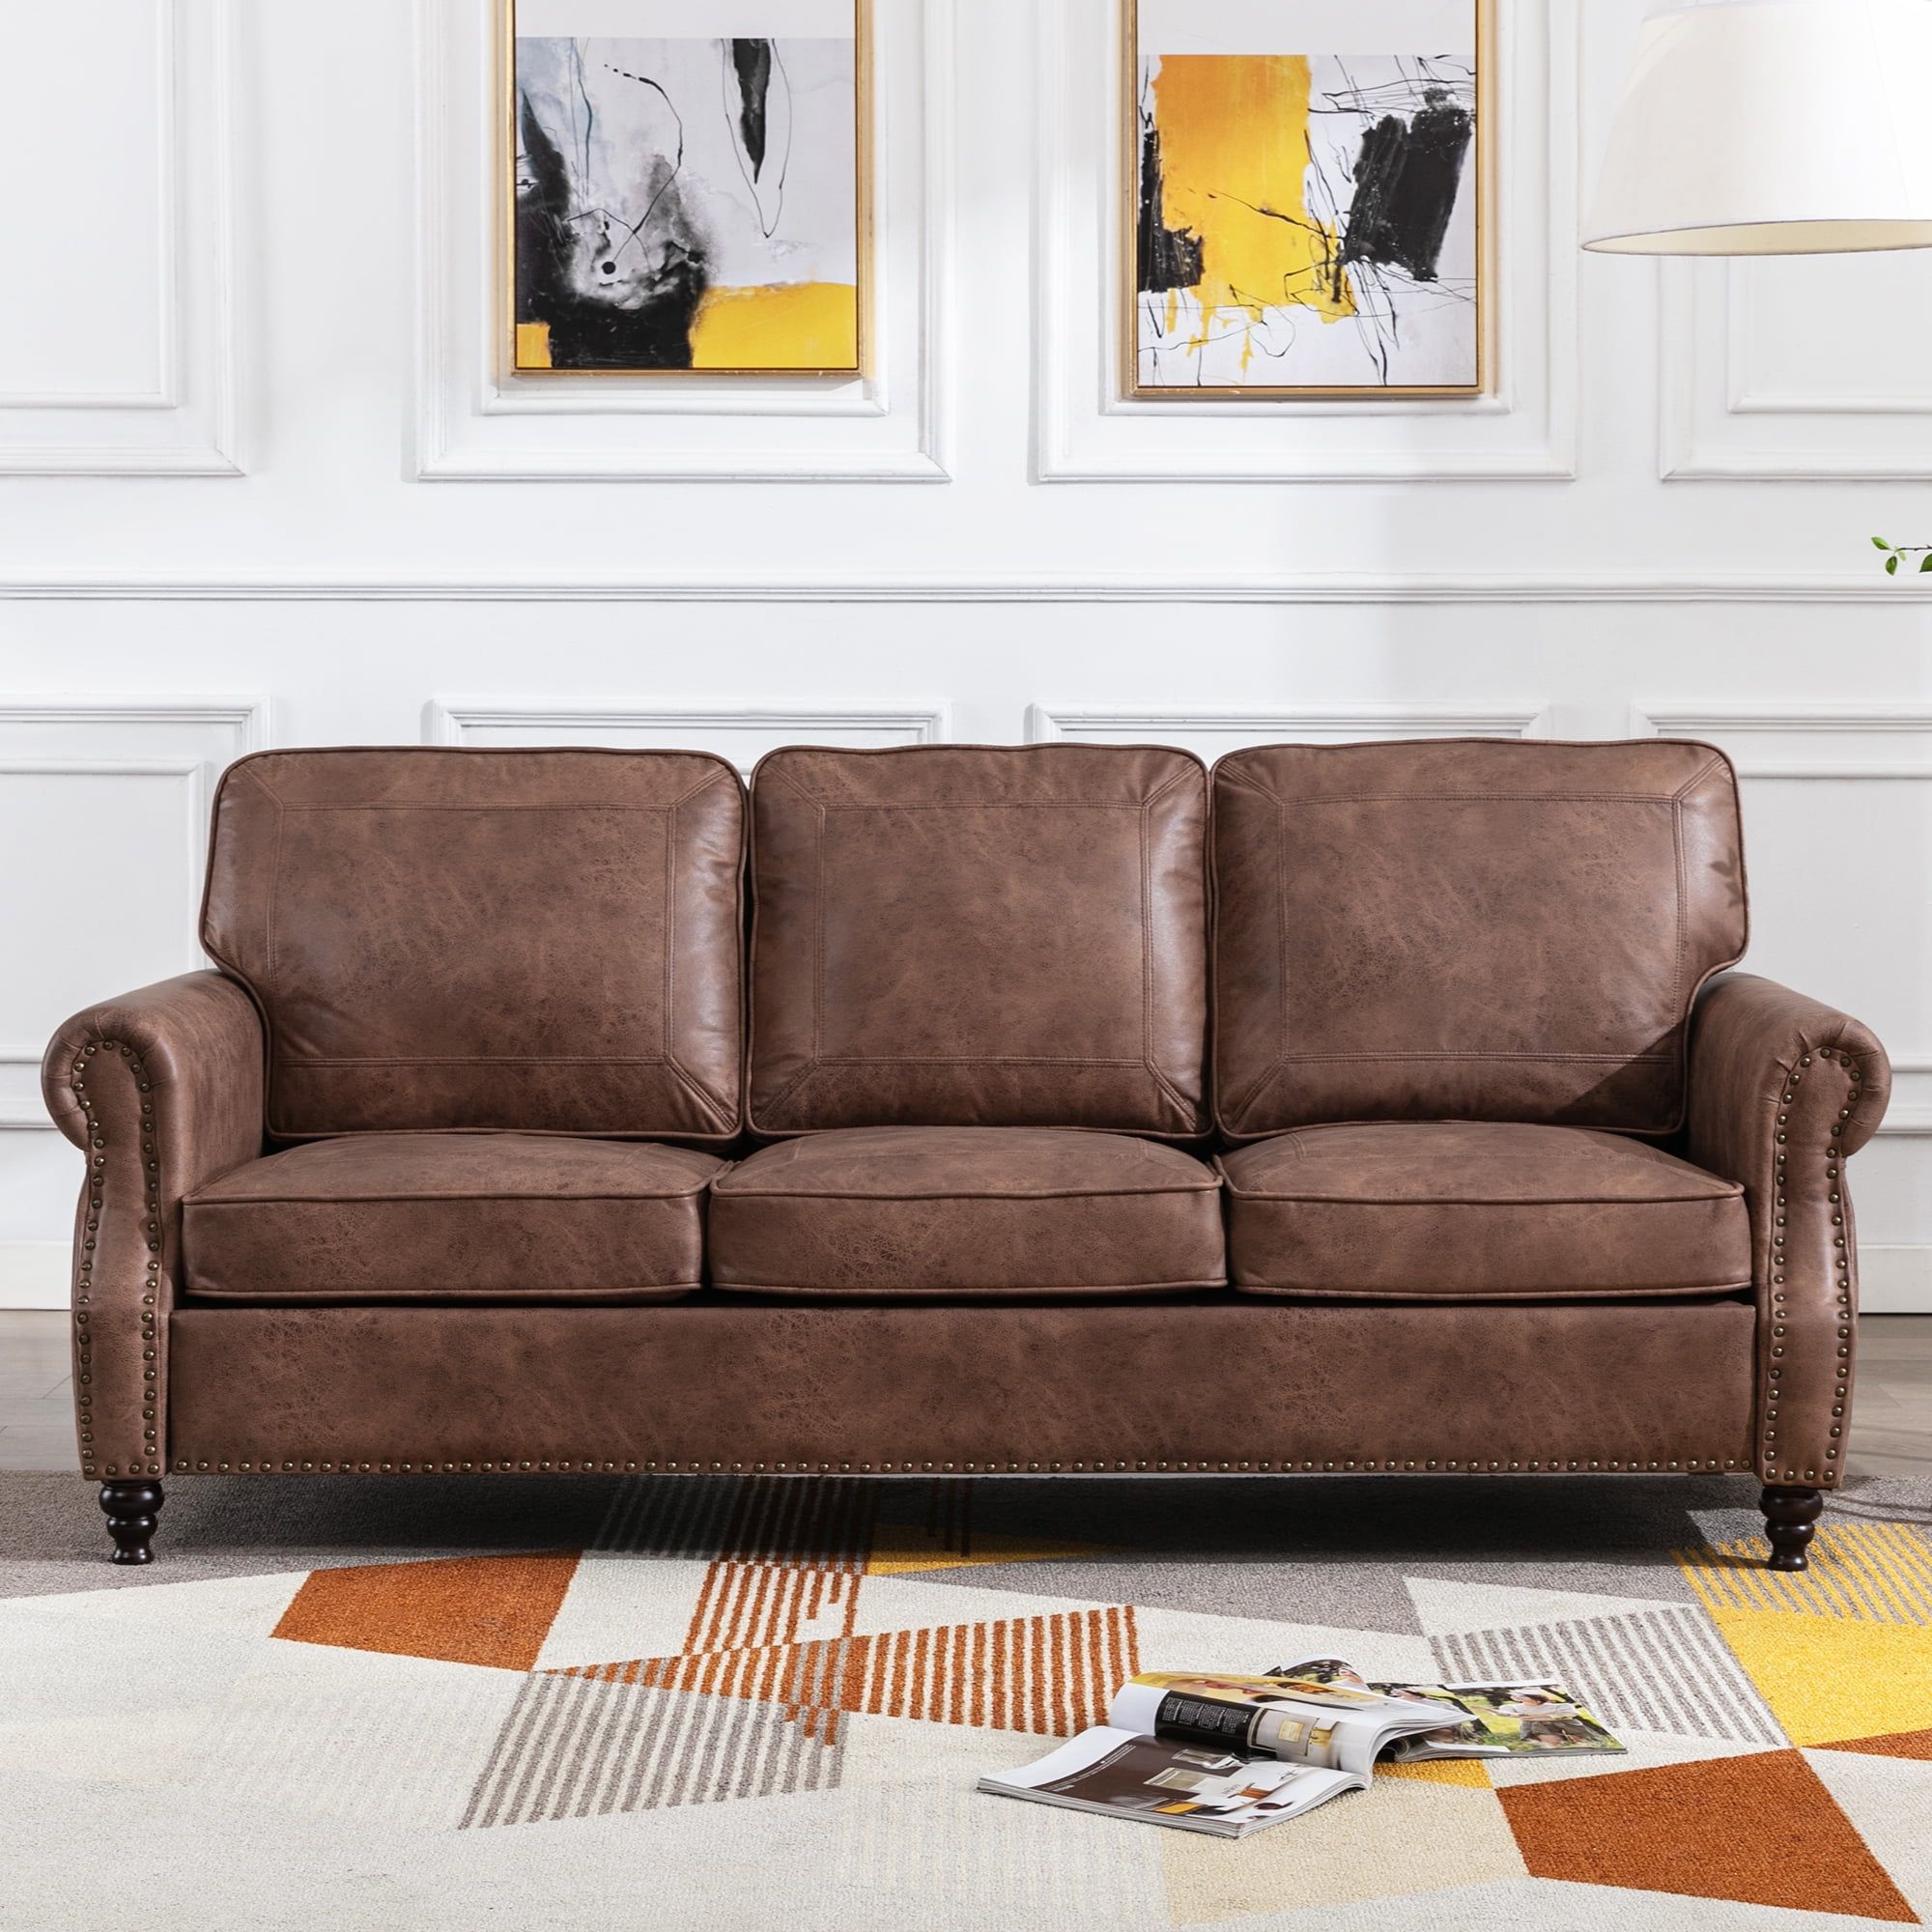 Dreamsir 80" Faux Leather Sofa Couch – Traditional 3 Seater With Nailhead  Trim, Rolled Arms, And Easy Assembly (chocolate Brown) – Walmart With Regard To Faux Leather Sofas In Chocolate Brown (Photo 1 of 15)